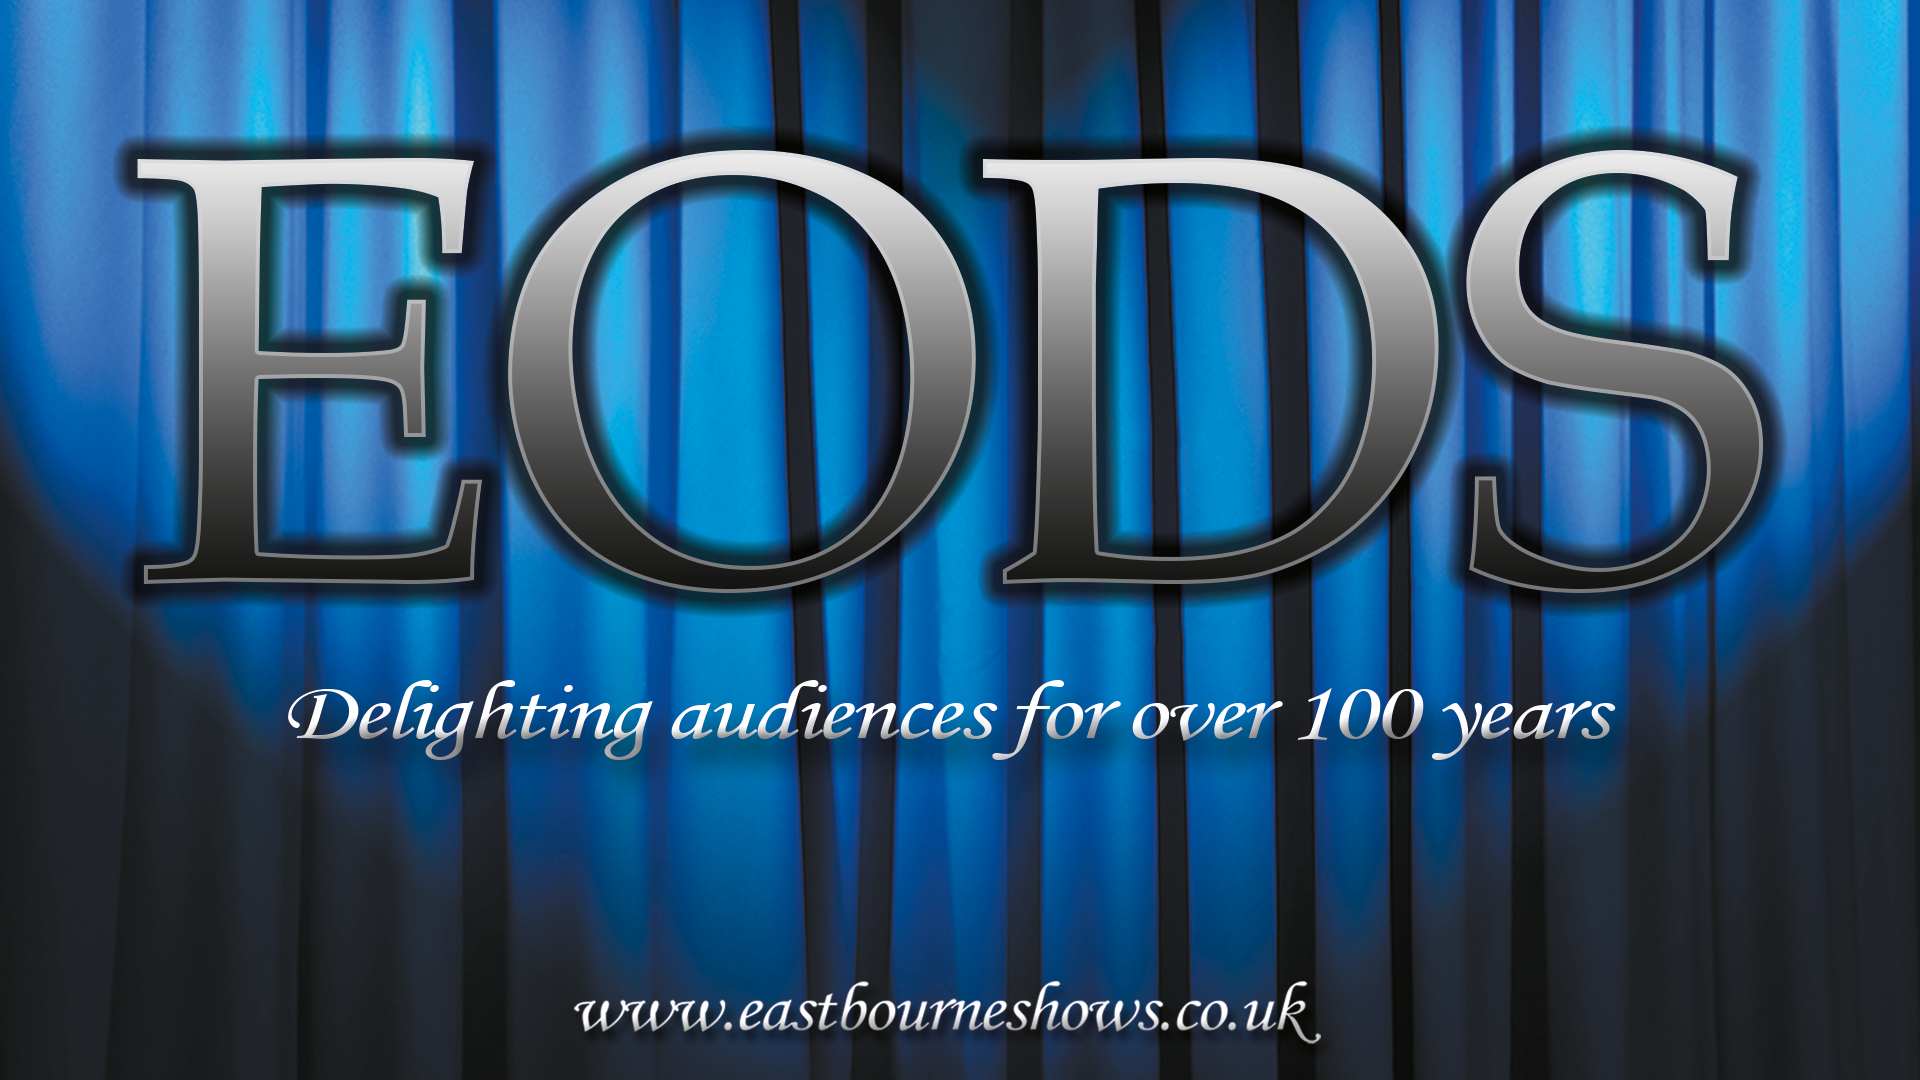 Eastbourne Operatic & Dramatic Society